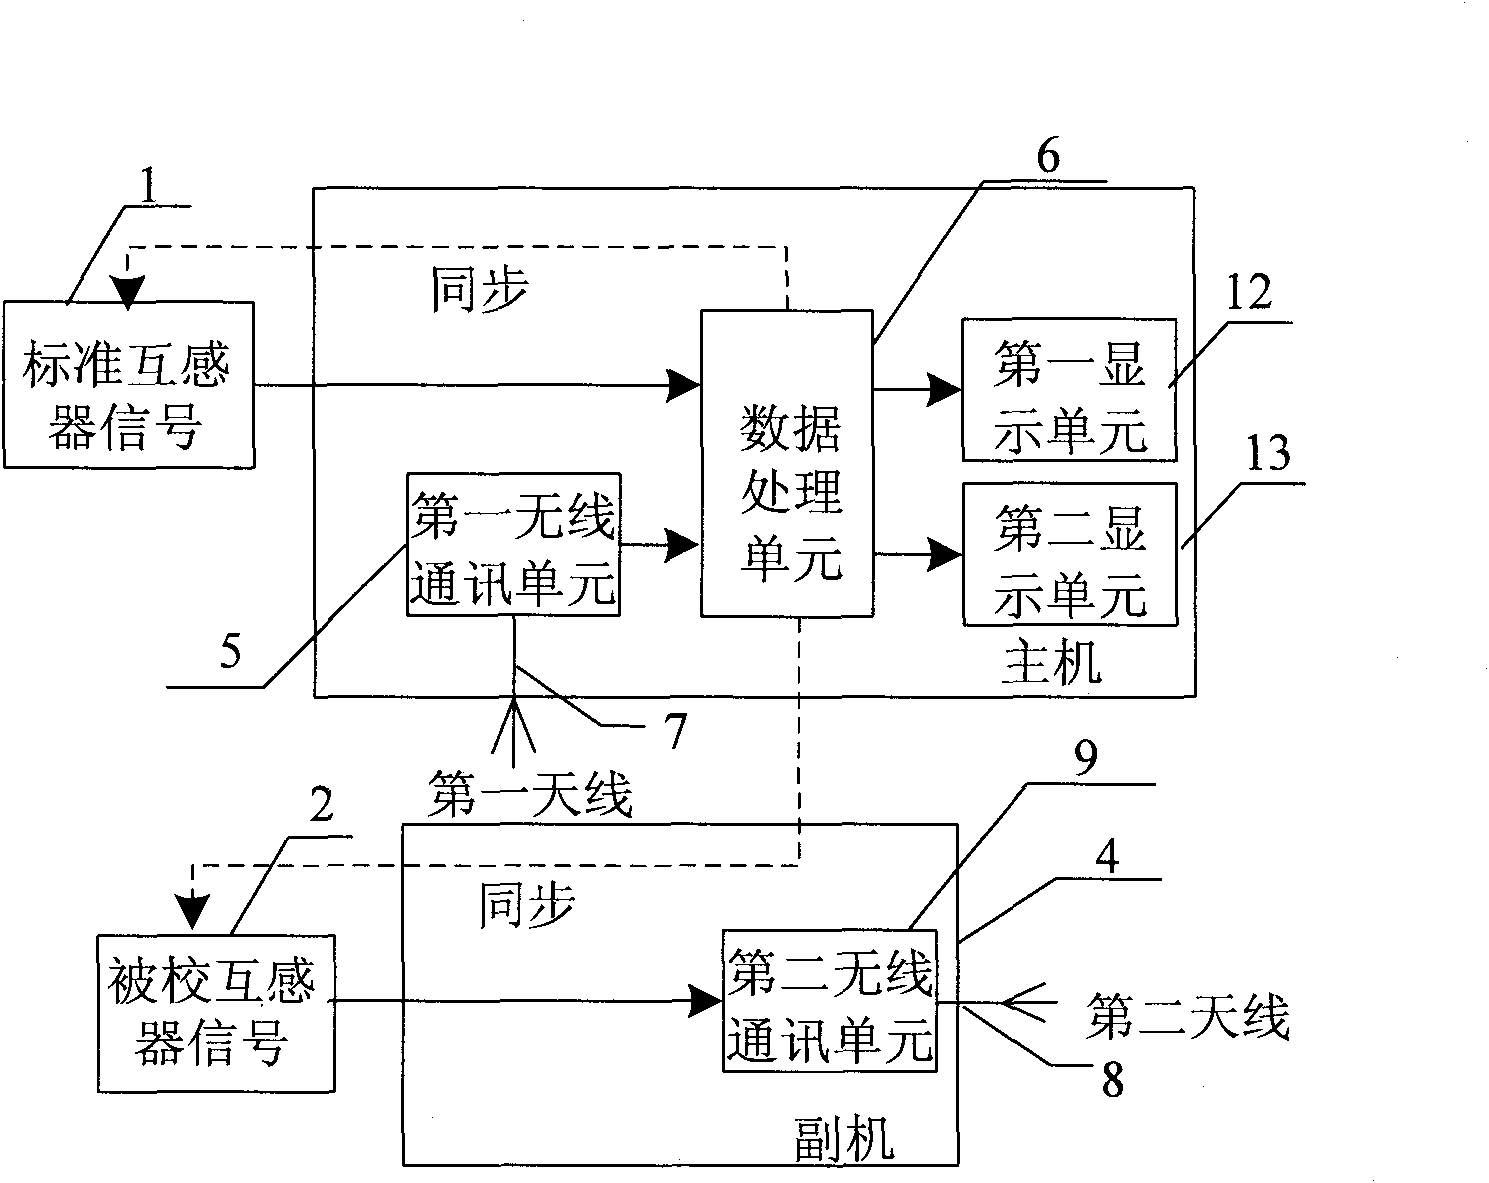 Mutual inductor calibration instrument